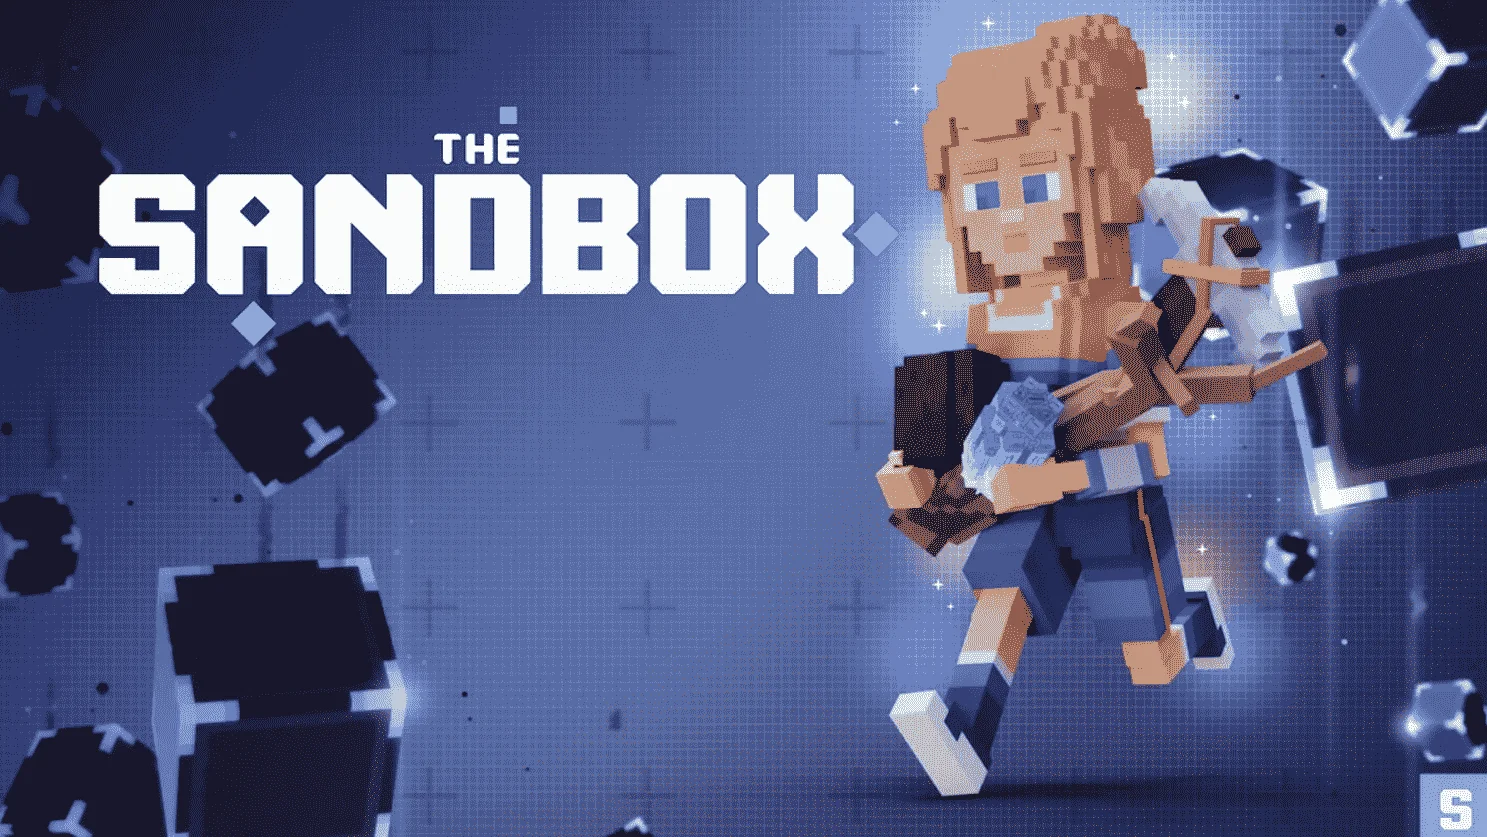 The Sandboxs Meteoric Rise $20M Funding Propels Valuation to $1B-min